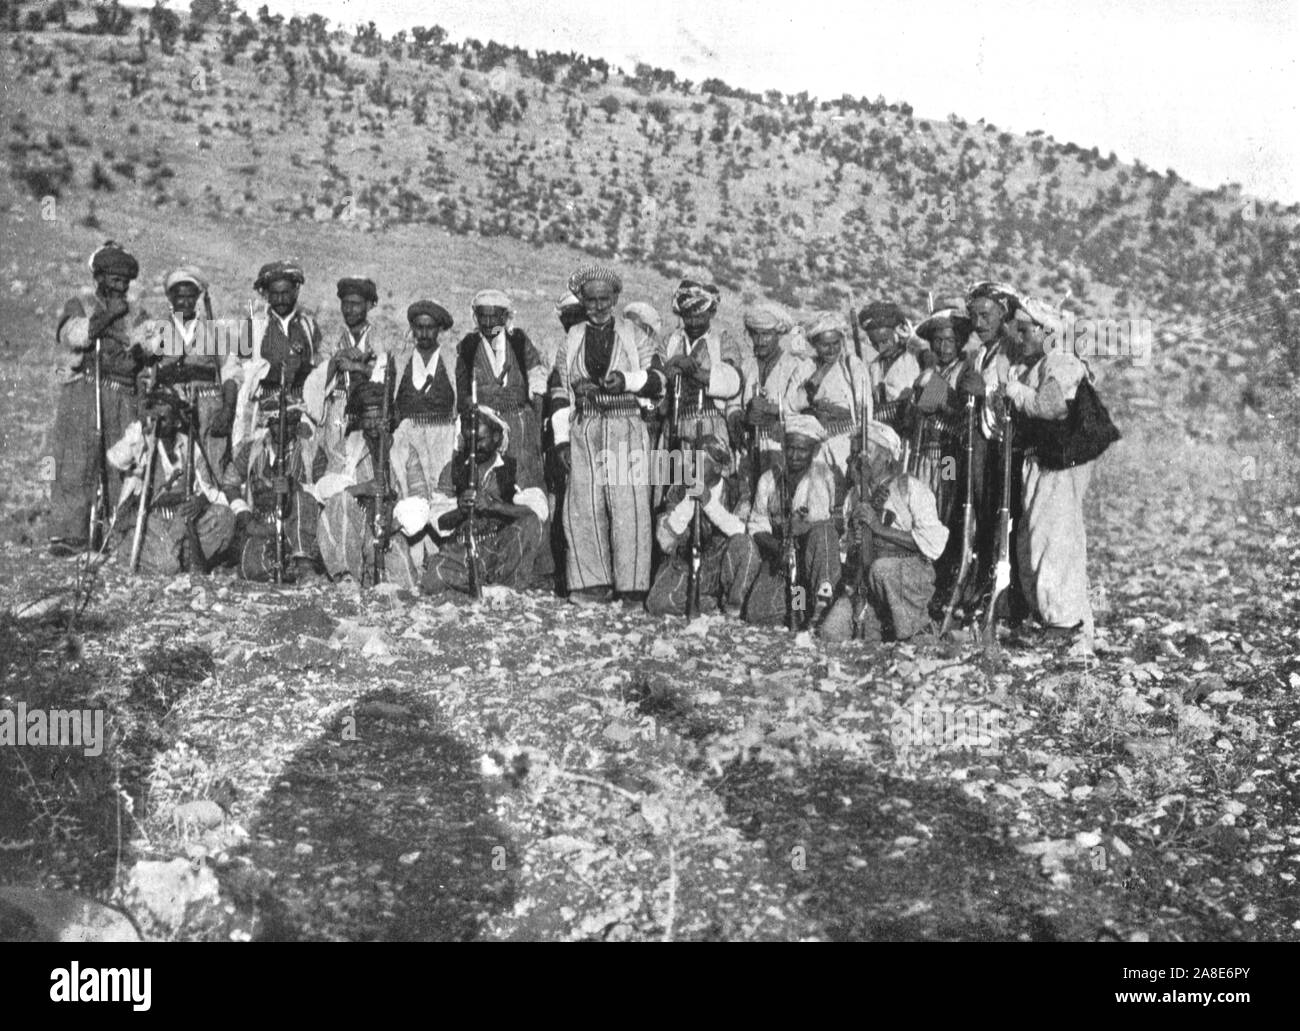 'Ahmed Agha', c1906-1913, (1915). Kurdish men with rifles and bullet belts, Shirwan, (eastern Turkey). 'A little further on we met Ahmed Agha and fifty gunmen. The Agha was a tall, handsome old man, with a pathetic and harassed expression. He pointed sadly to the smoking ruins beyond the river, and showed us the wretched burnt-out inhabitants, collecting wood and stones with which to build fresh houses...When I saw this devastation, I began to think of the advantages of centralised government over feudal times'. From &quot;The Caliphs' Last Heritage, a short history of the Turkish Empire&quot; Stock Photo